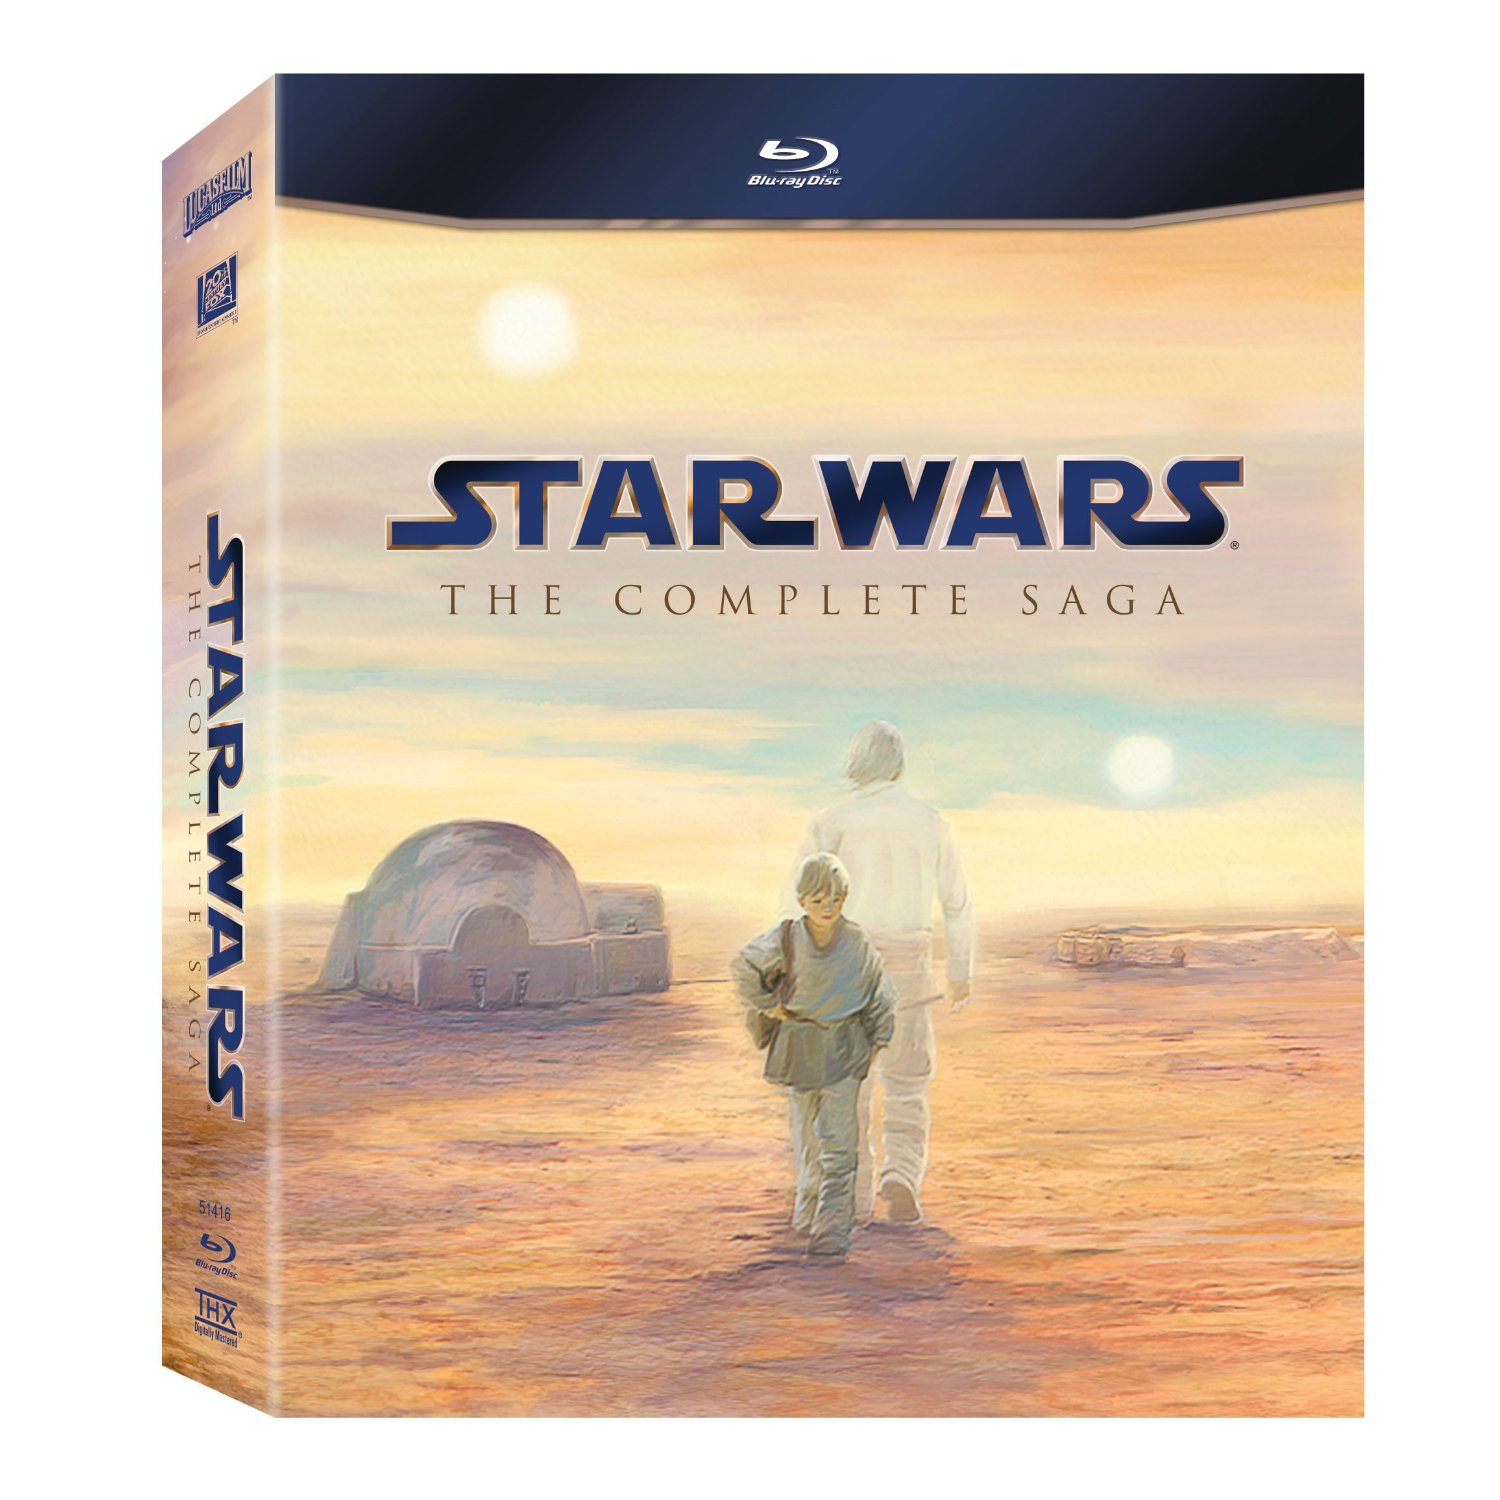 Star Wars Saga gets the ‘Lucas touch’ once again – Blu-Ray release features more tweaks